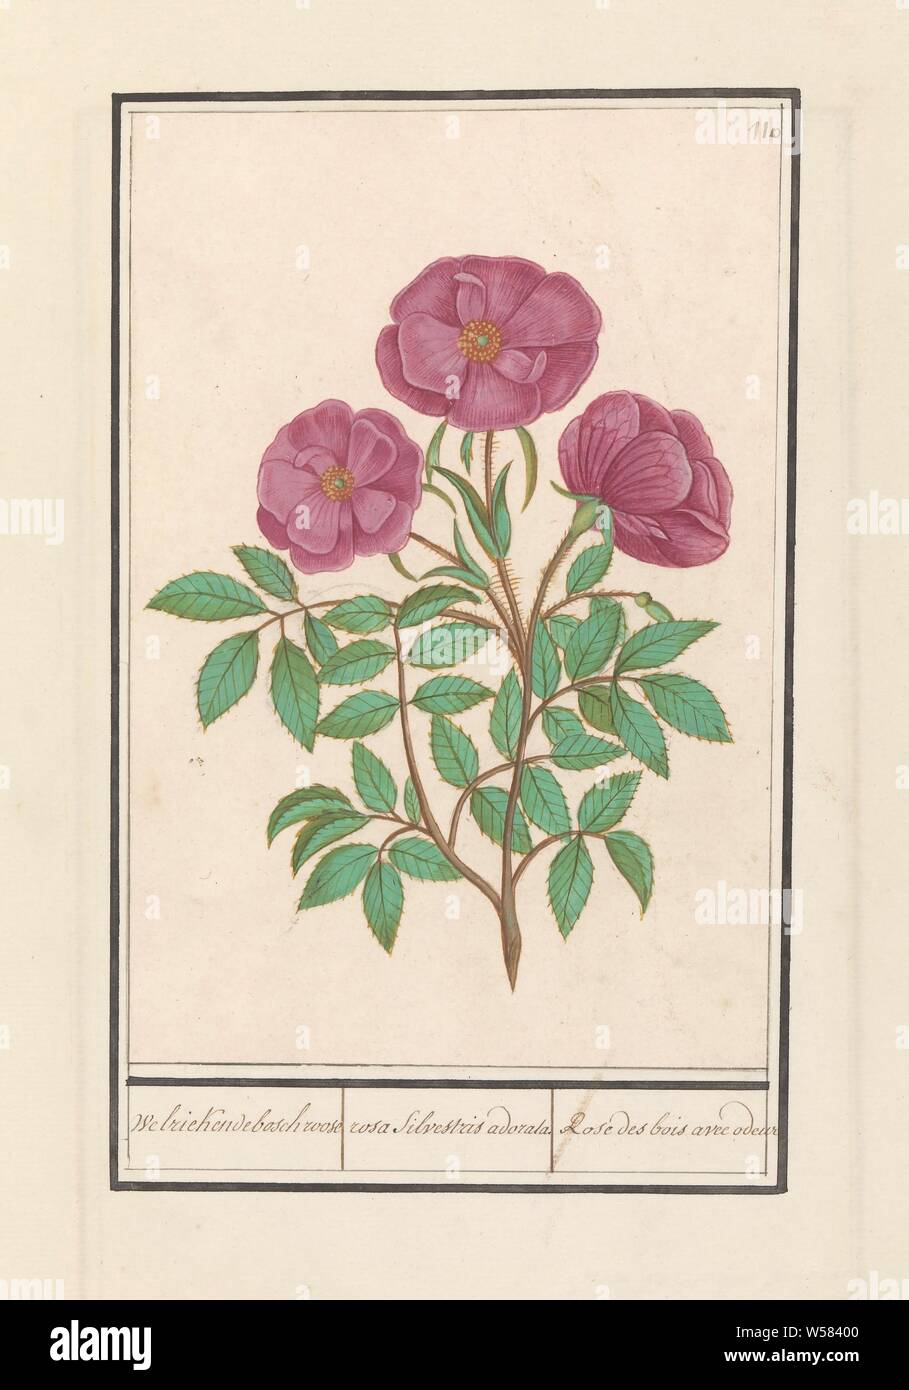 Wild rose (Rosa) Fragrant bosch roose / rosa silverstris adorata. / Rose des bois avec odeur (title on object), Wild-scented rose. Numbered top right: 110. Part of the second album with drawings of flowers and plants. Ninth of twelve albums with drawings of animals, birds and plants known around 1600, commissioned by Emperor Rudolf II. With explanations in Dutch, Latin and French., Flowers: rose, Anselmus Boetius de Boodt, 1596 - 1610, paper, watercolor (paint), deck paint, pencil, pen, h 216 mm × w 145 mm Stock Photo